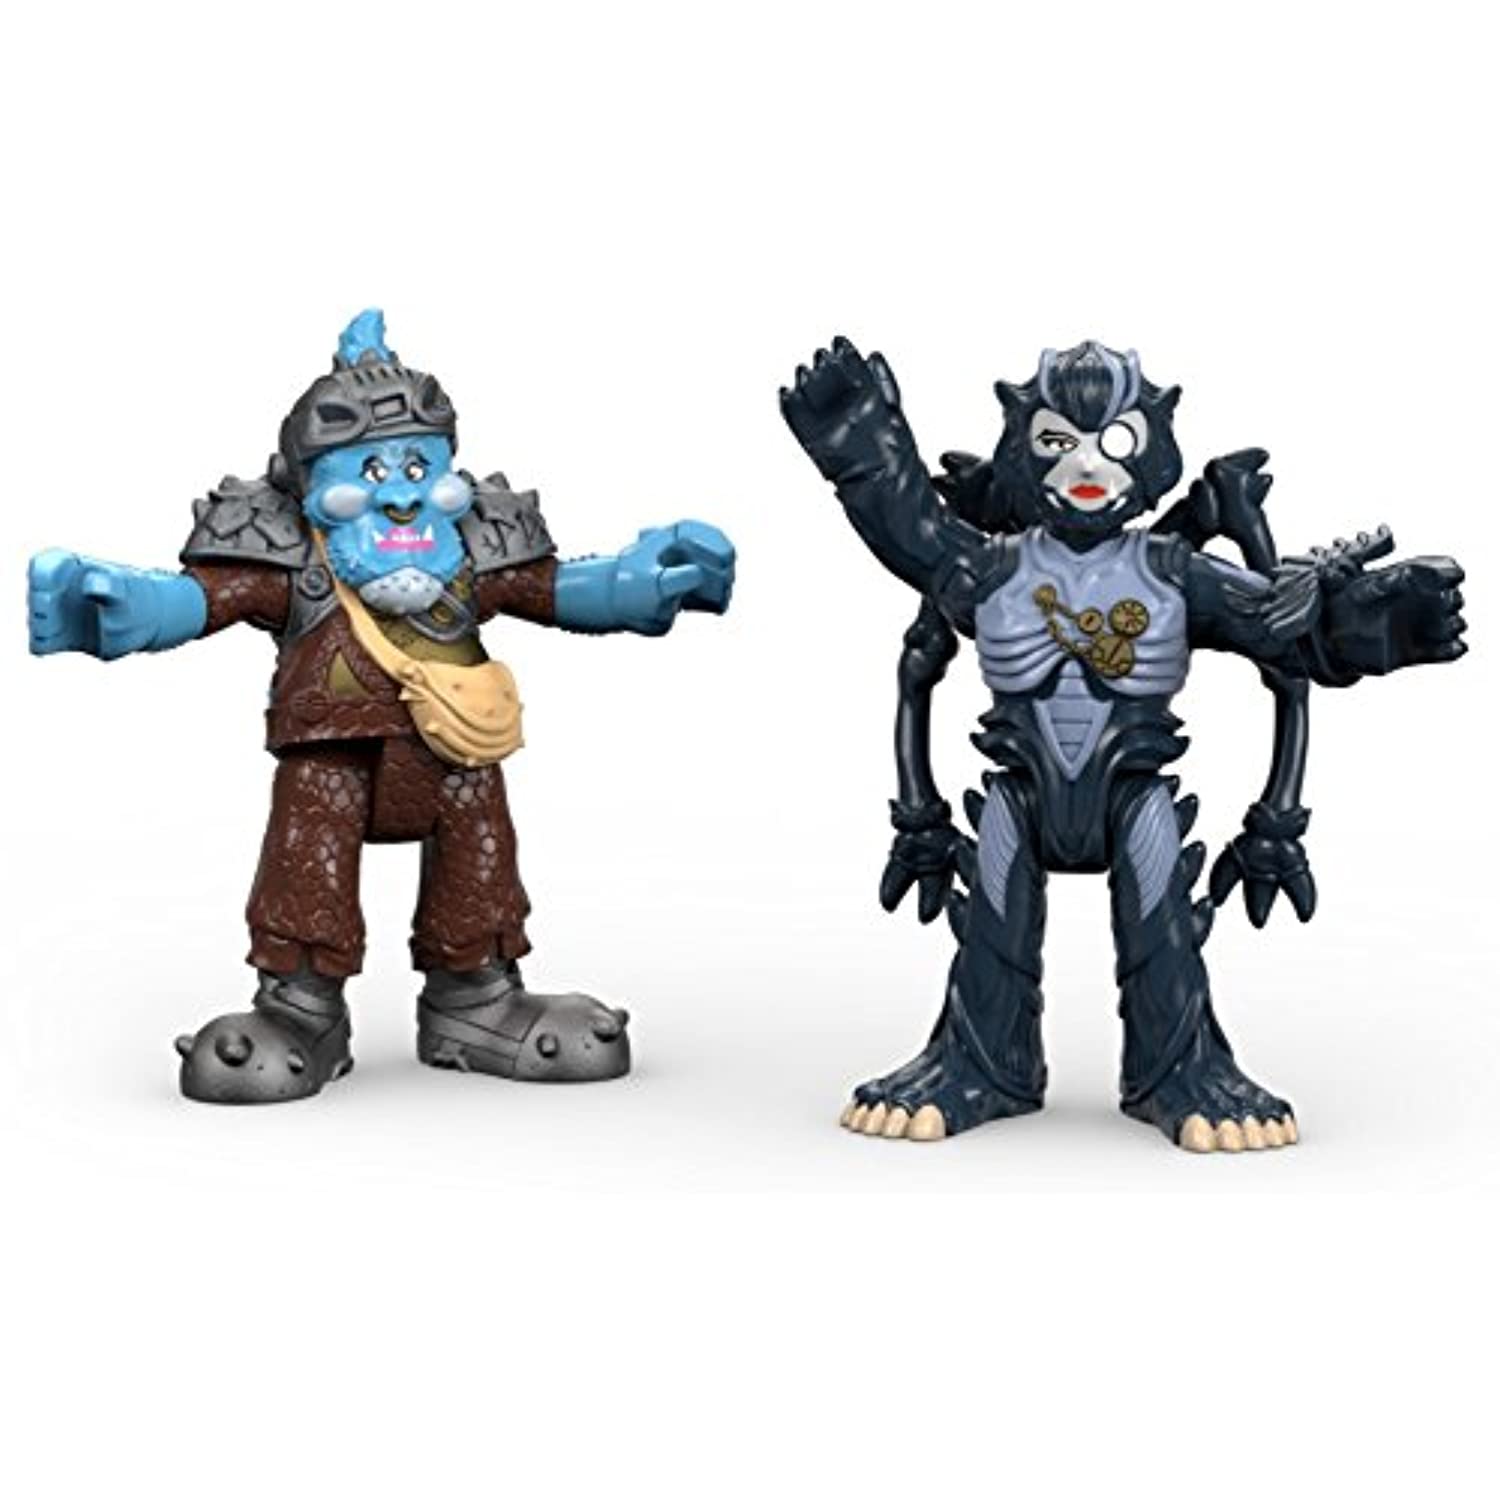 Fisher-Price Imaginext Power Rangers Squat & Baboo